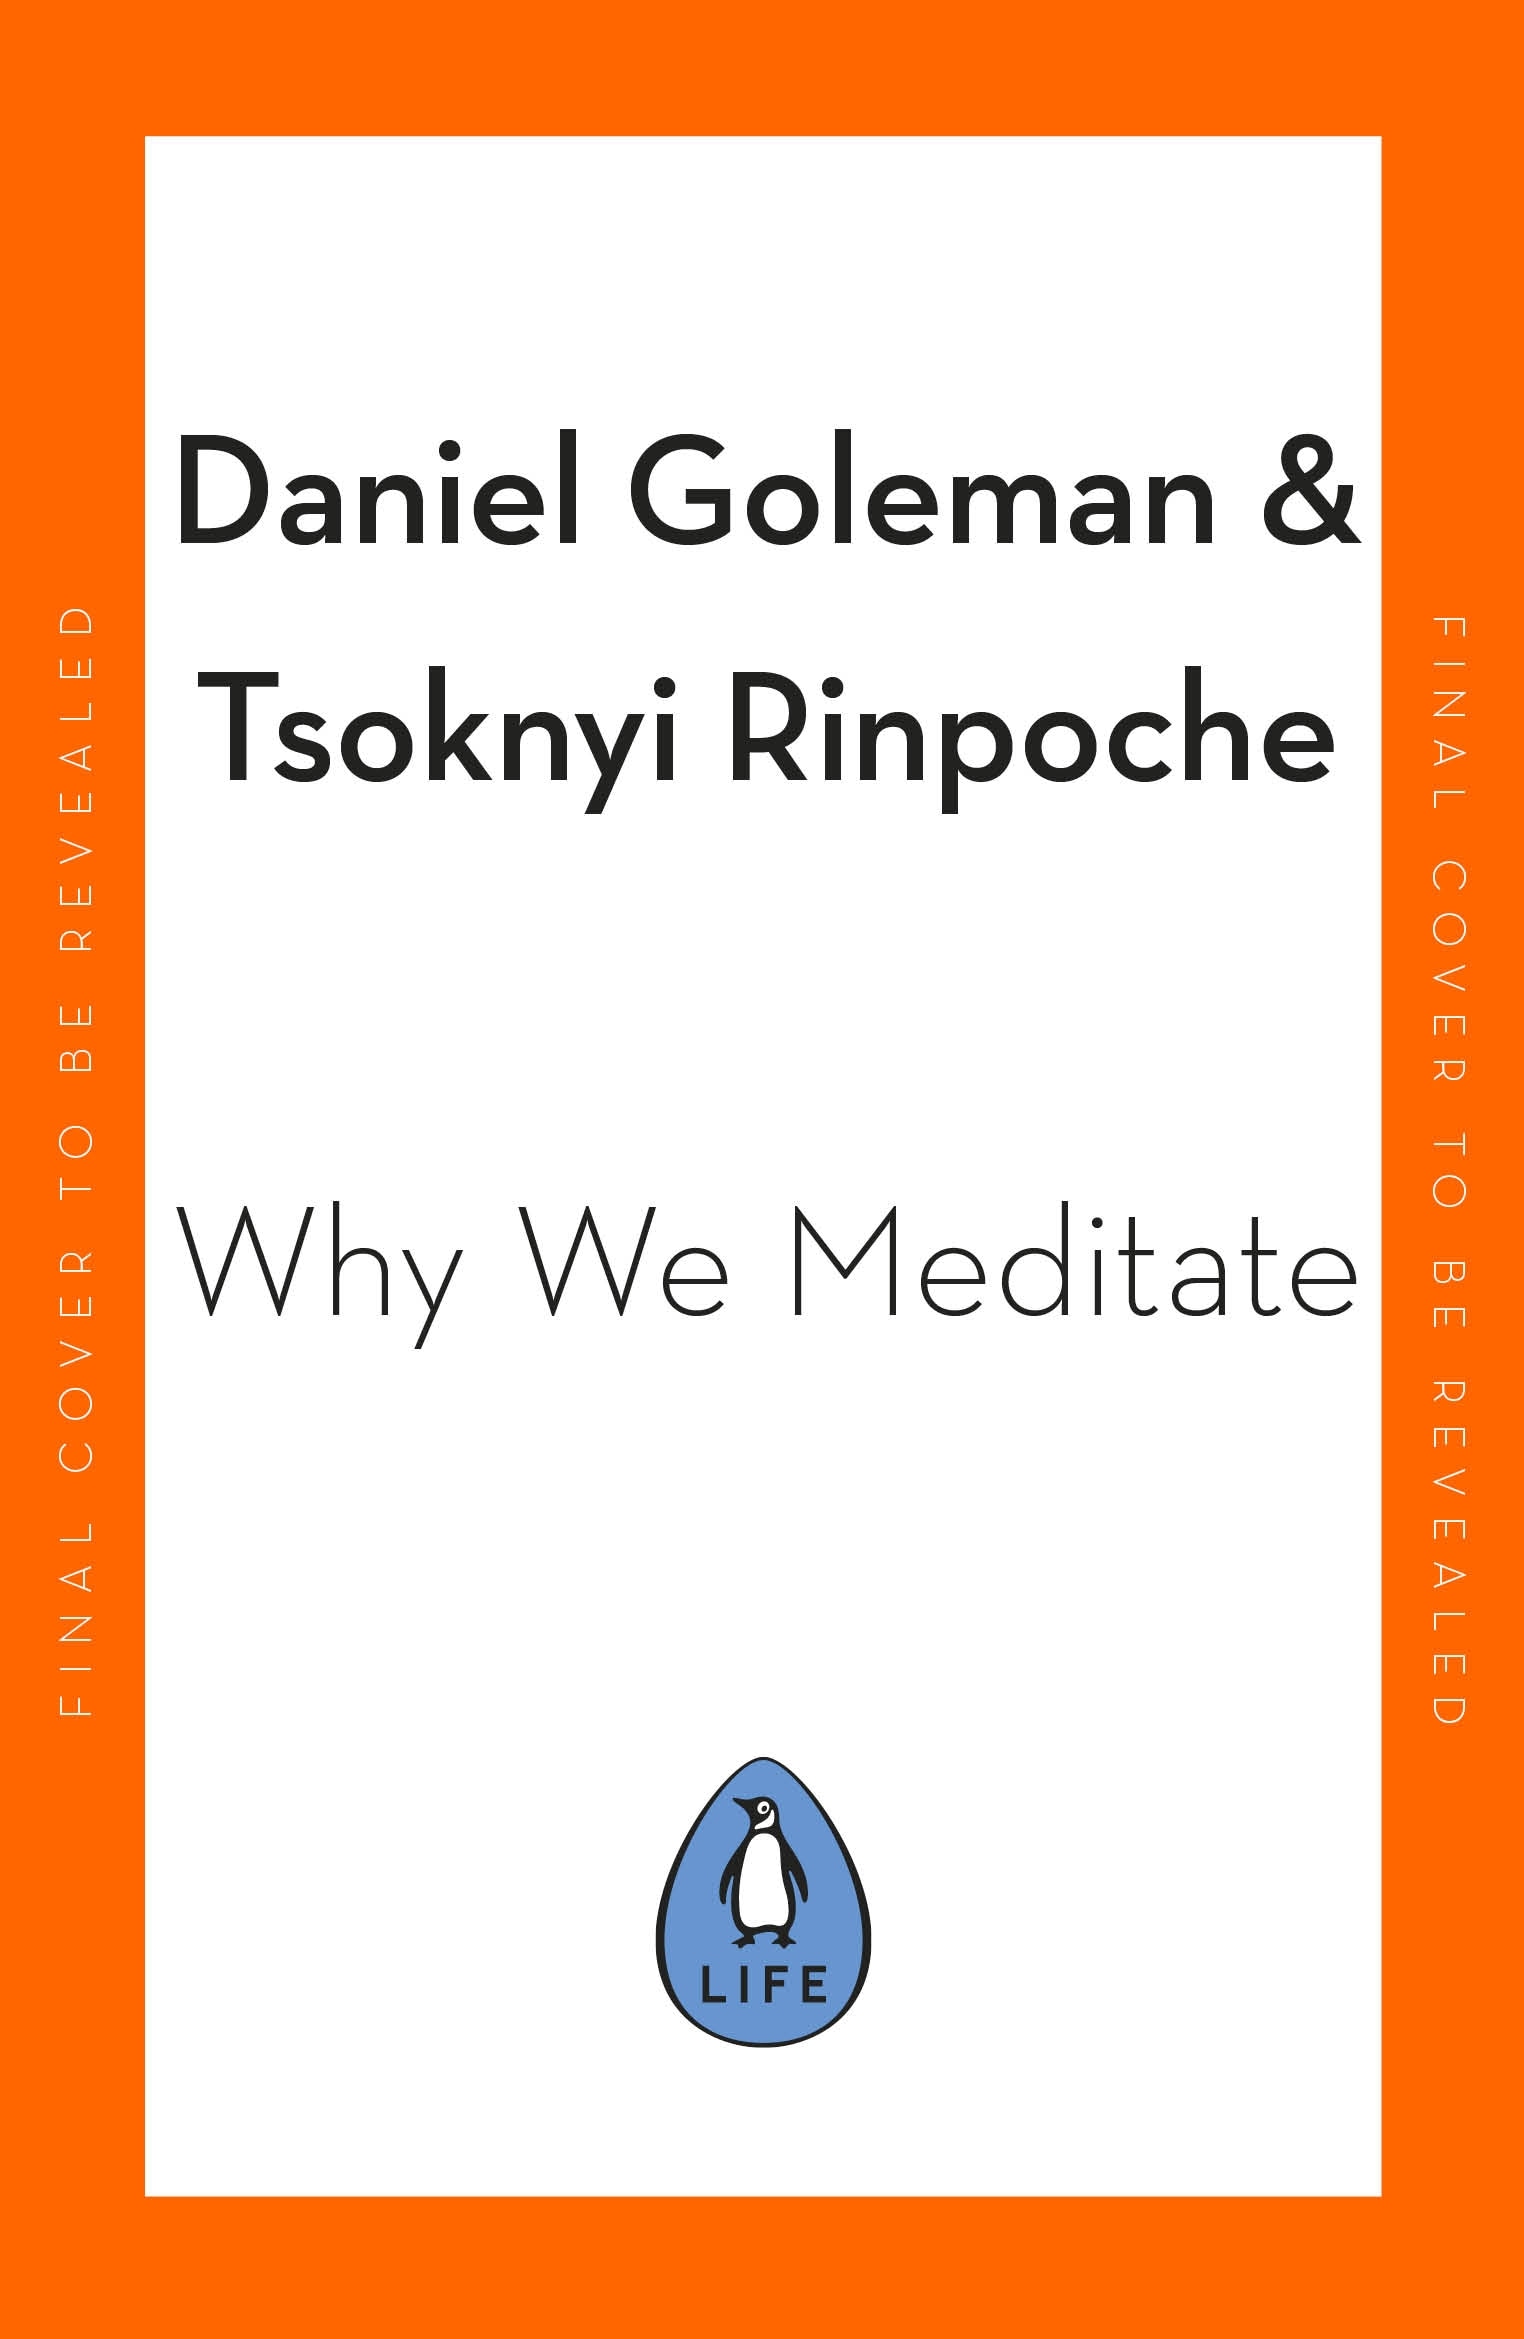 Book “Why We Meditate” by Daniel Goleman, Tsoknyi Rinpoche — October 13, 2022